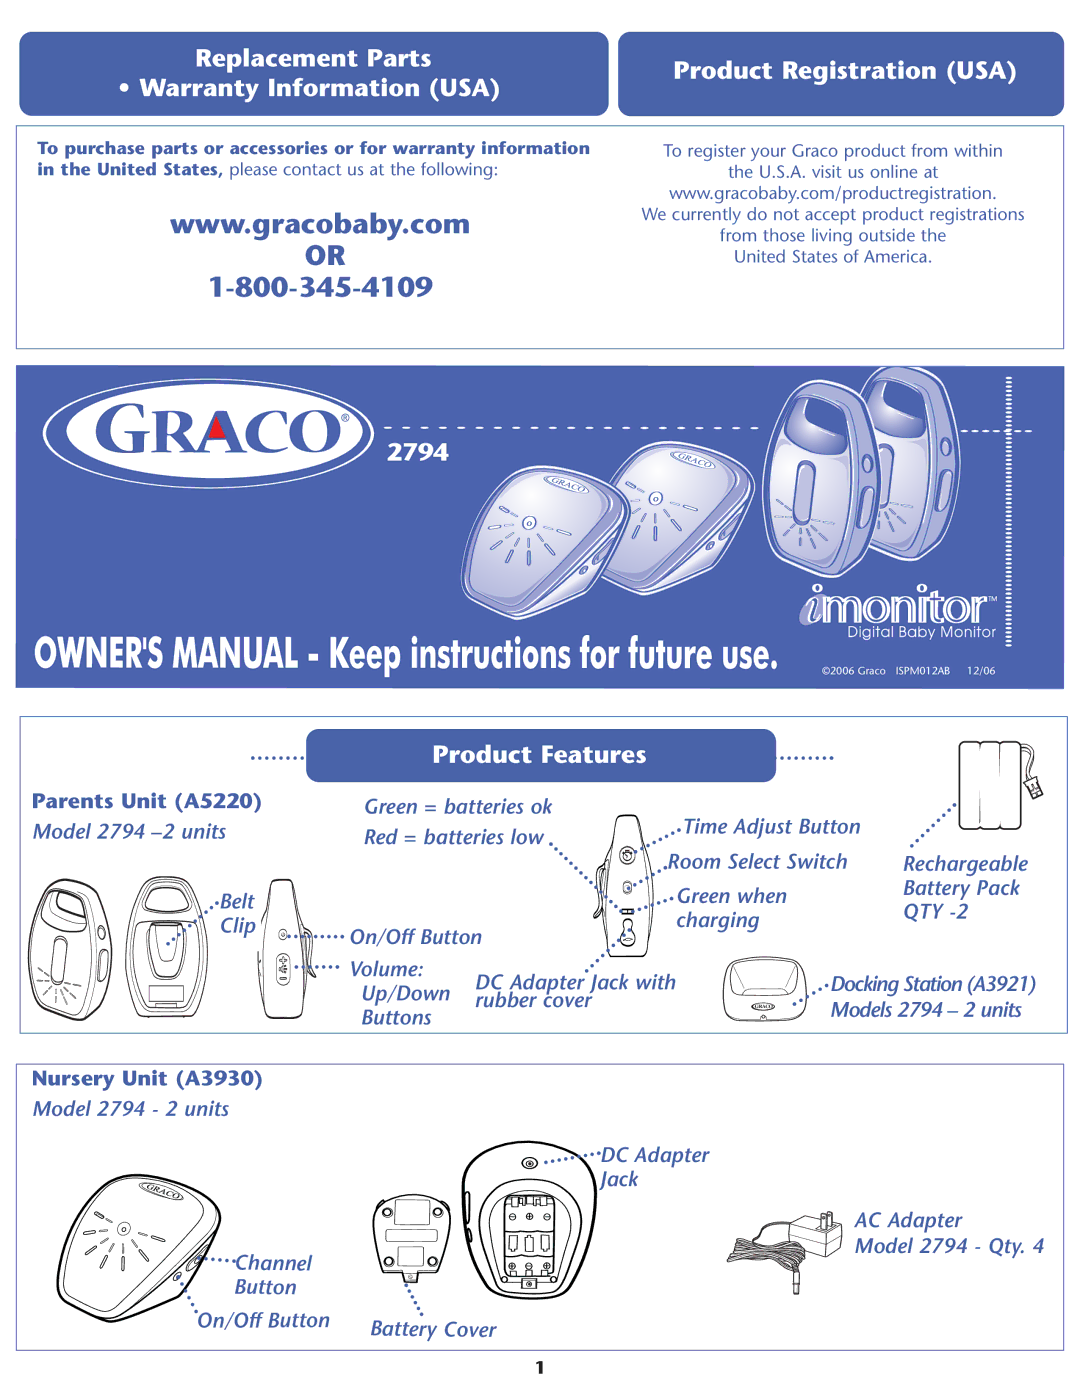 Graco A3930, A5220 warranty 2794, Product Features 